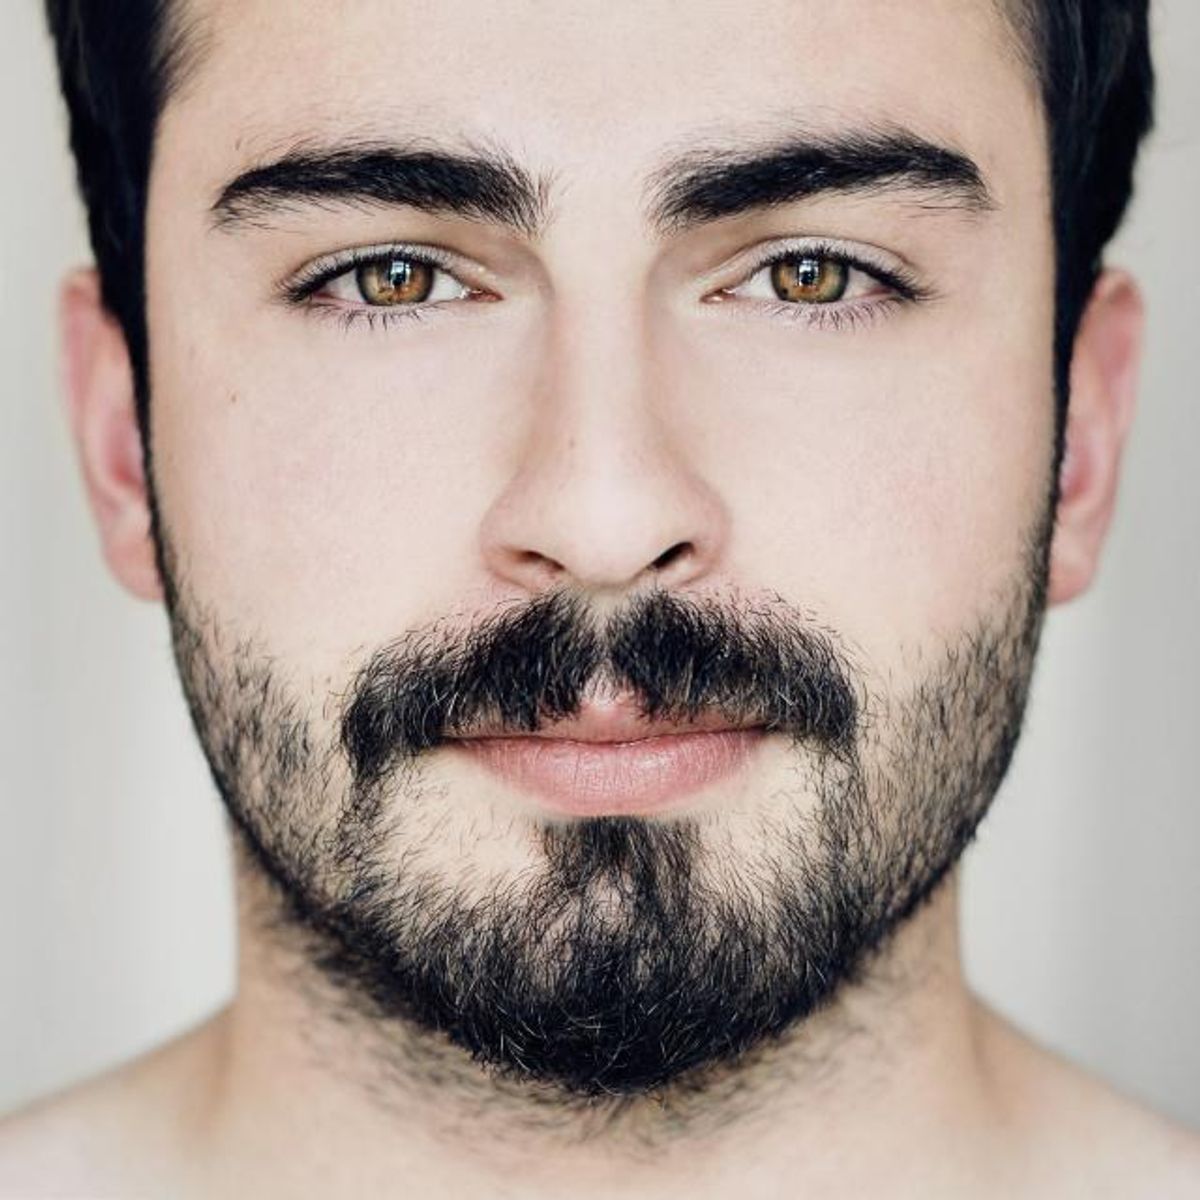 A Letter to the Men Who Get Their Brows Done